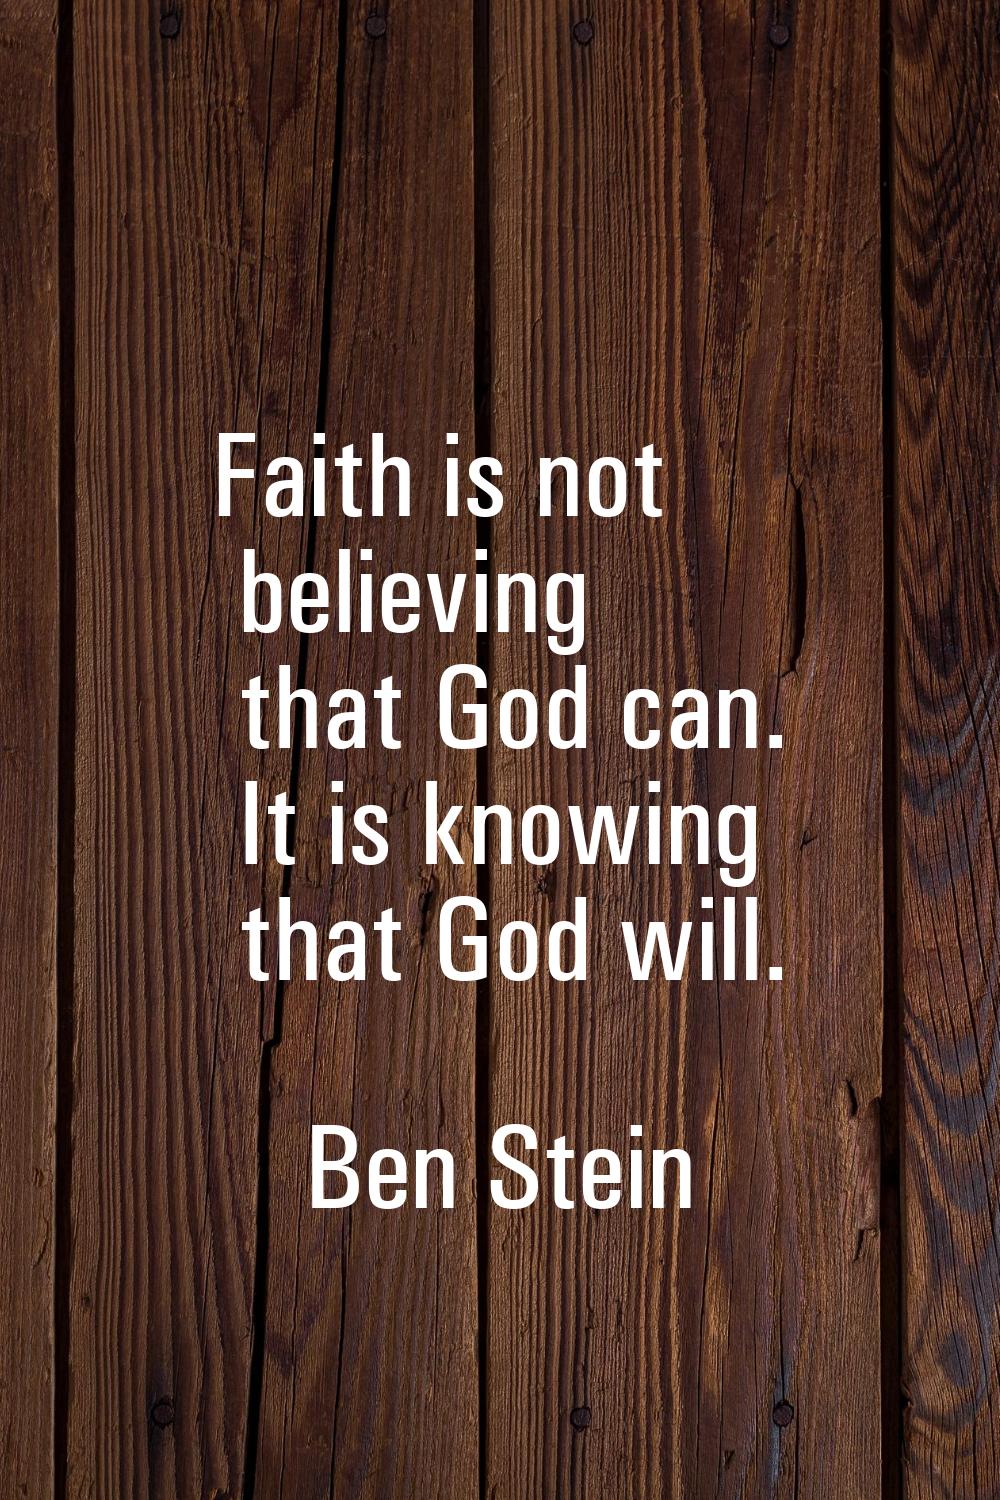 Faith is not believing that God can. It is knowing that God will.